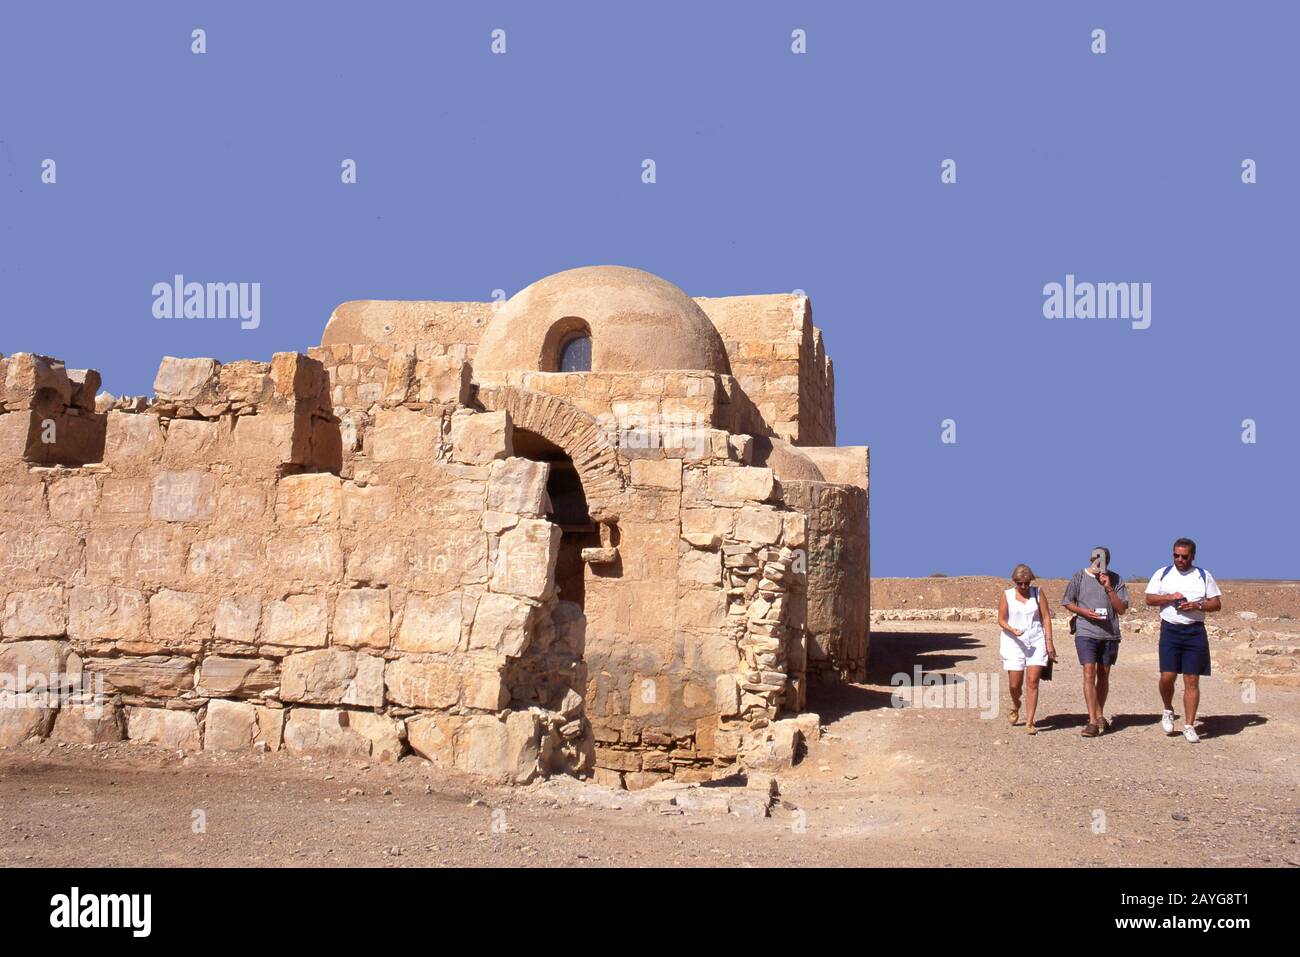 Qusayr Amra, Jordan-August 16,2001: Tourists at Qusayr Amra.This Desert Castle is the best-known of the desert castles located in present-day eastern Stock Photo